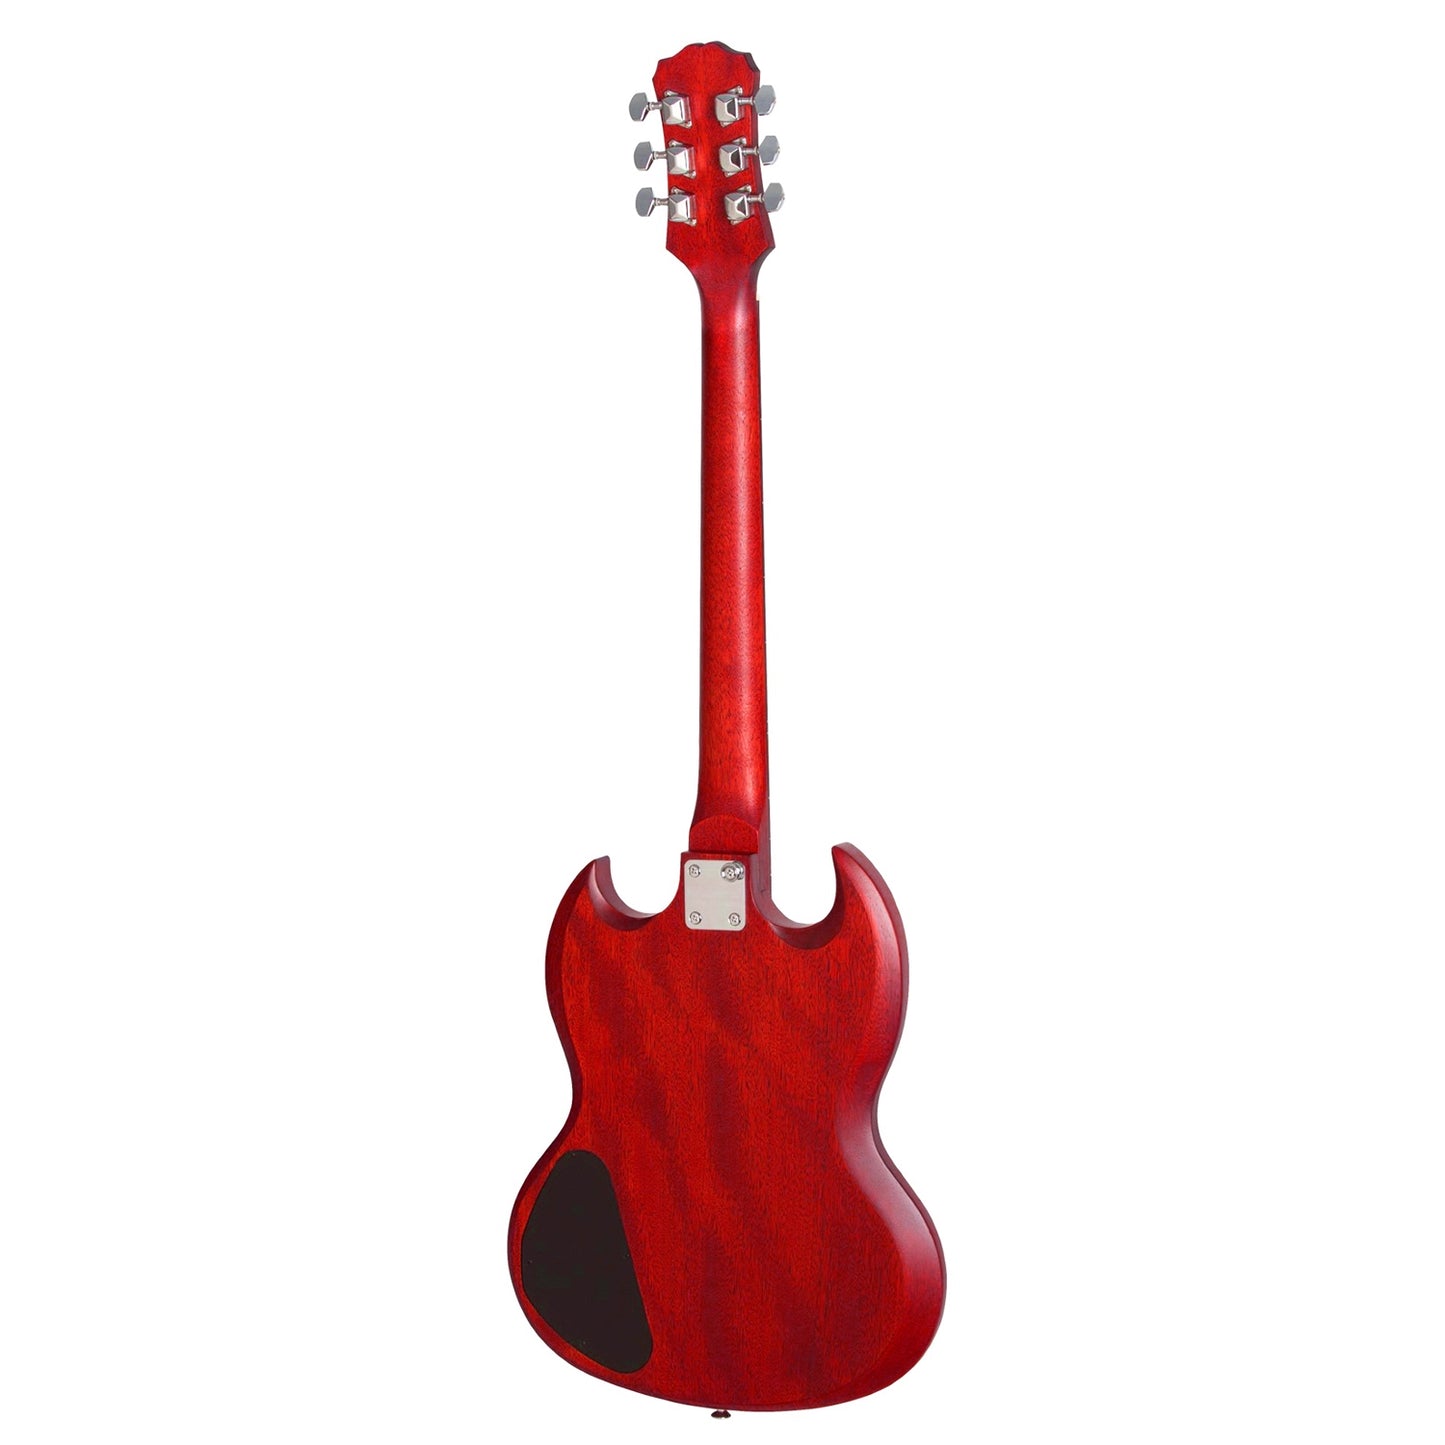 Epiphone SG Special VE 22-Fret HH Electric Guitar with Vintage Worn Finish (Available in Ebony Black, Cherry Red and Walnut Brown) | EGSV Series